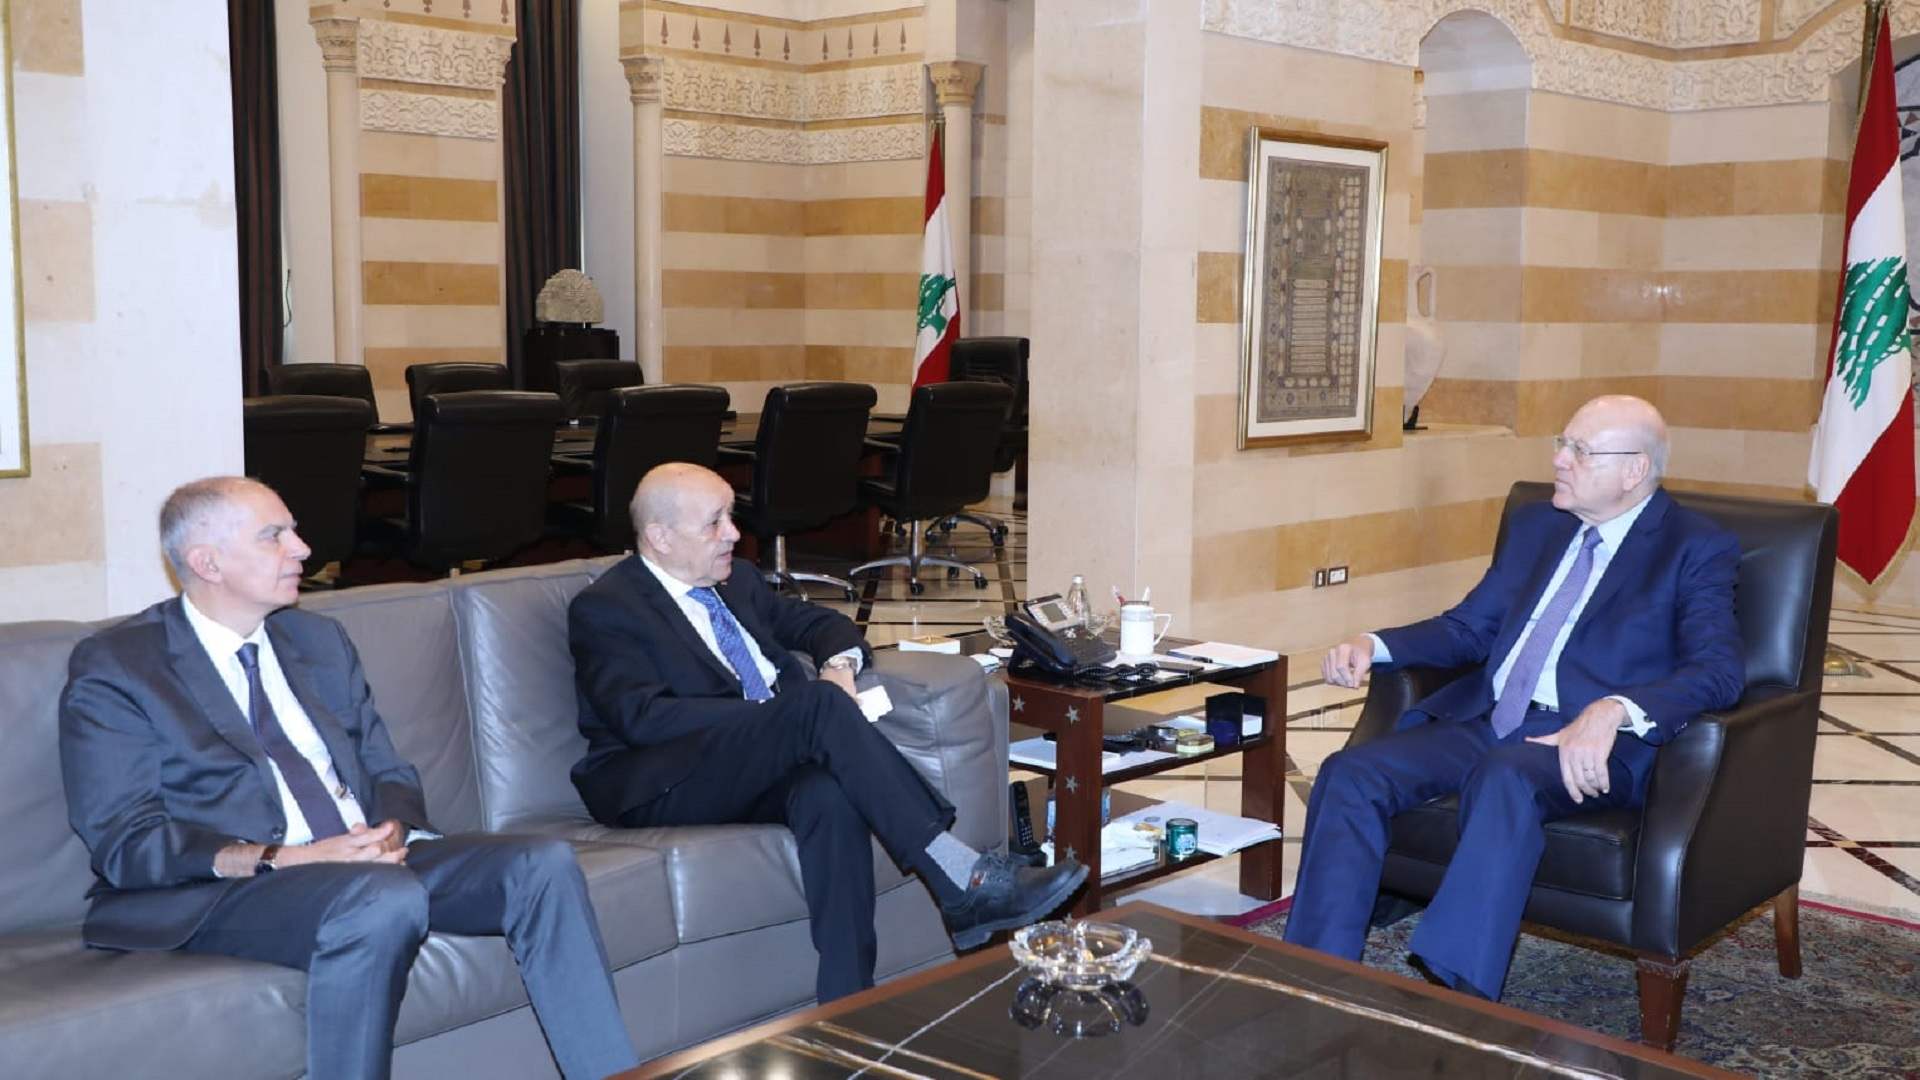 Le Drian hopes that the initiative announced by Berri could begin a path towards a solution during his meeting with Mikati